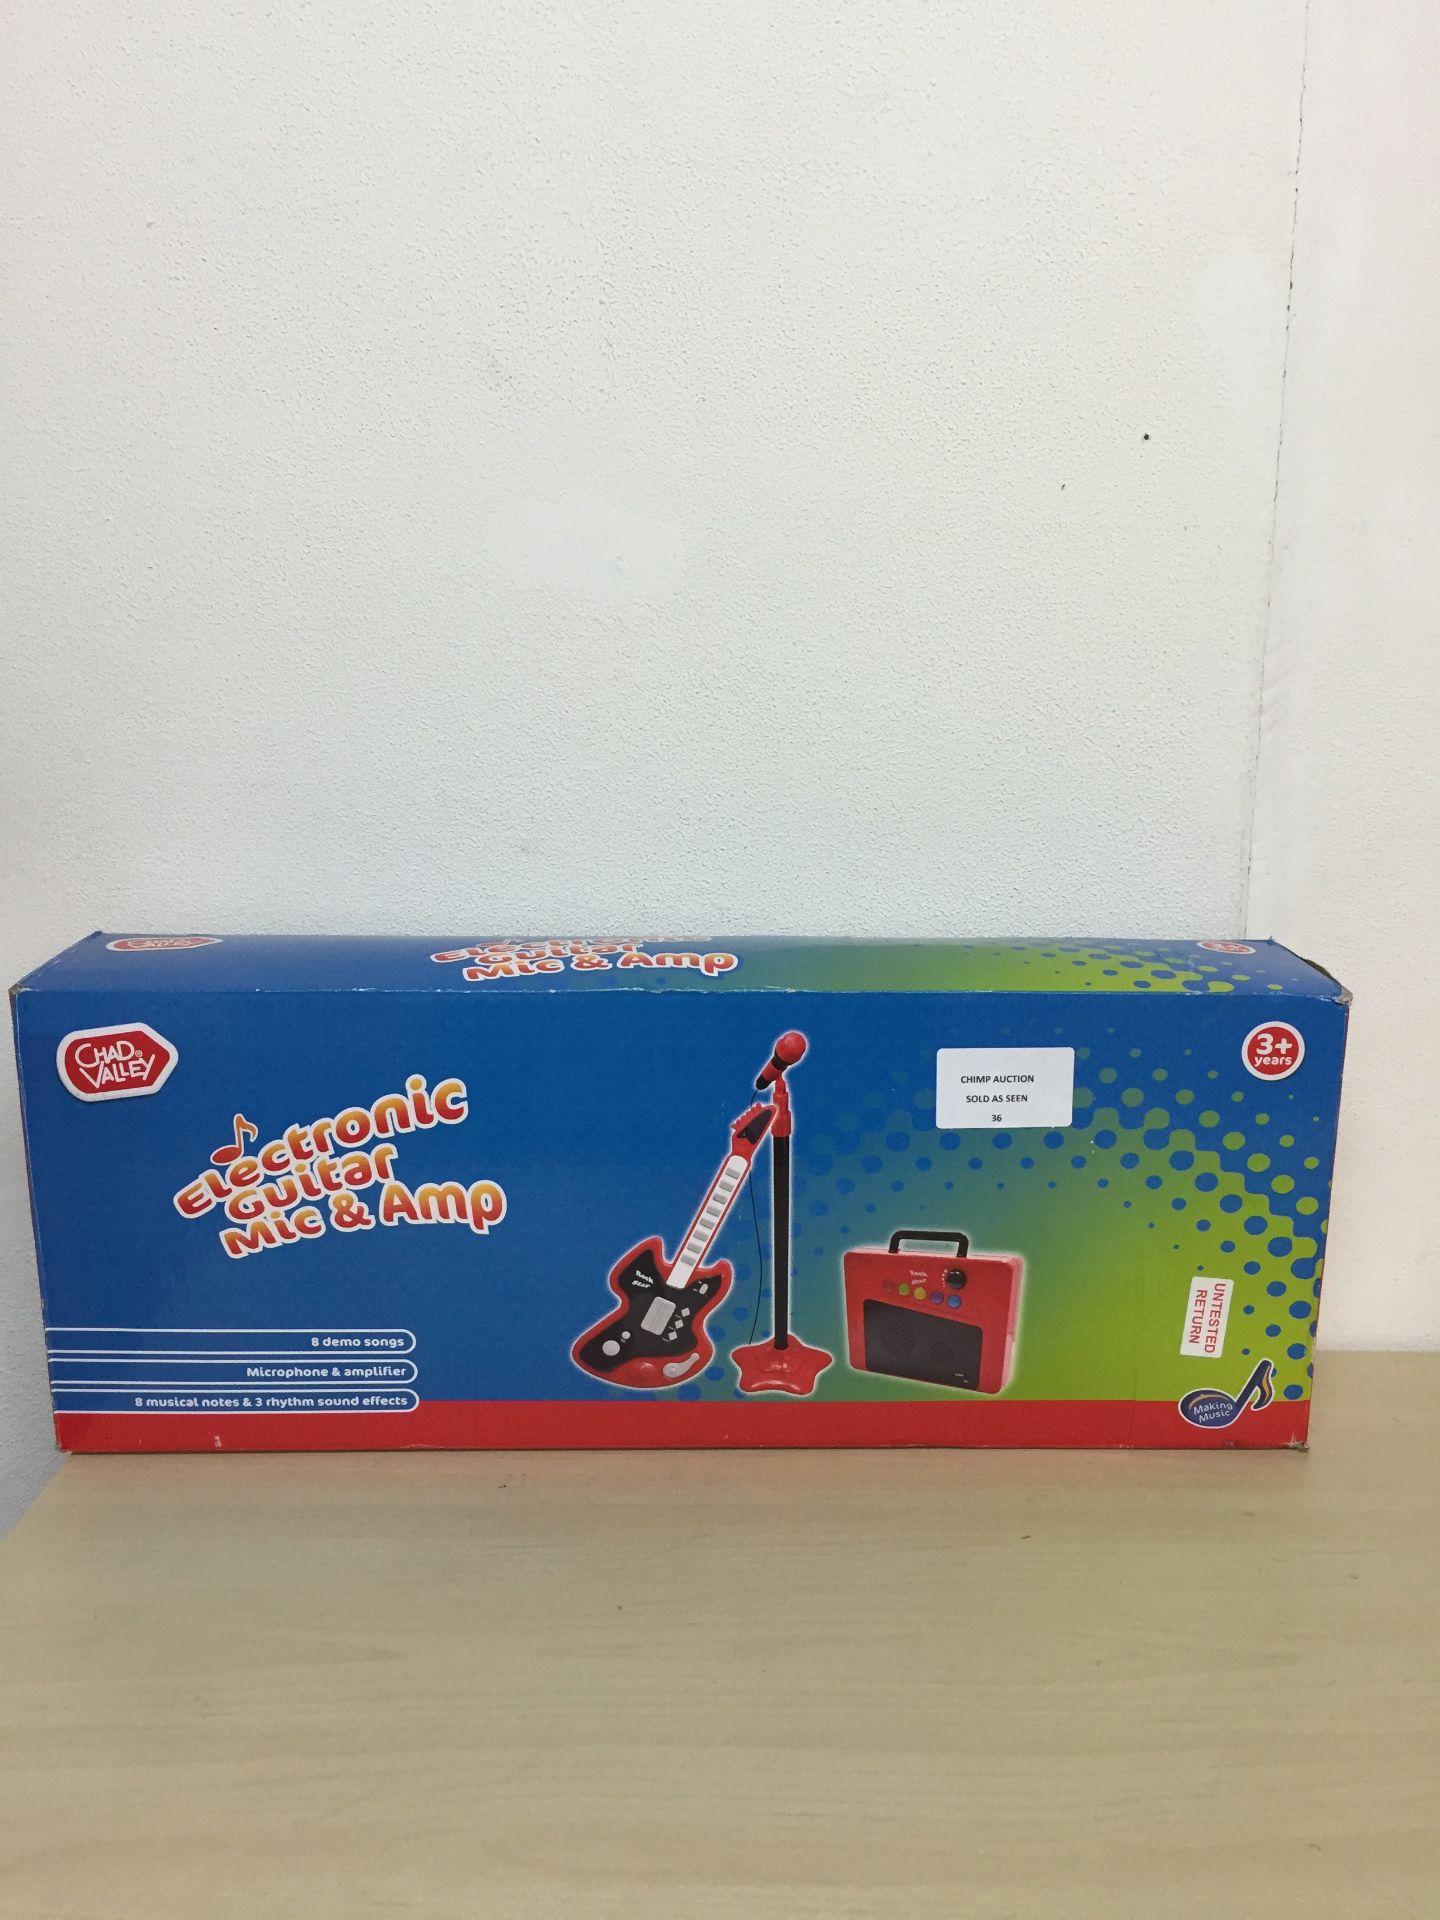 BOXED CHAD VALLEY ELECTRONIC GUITAR MIC & AMP RRP £34.99